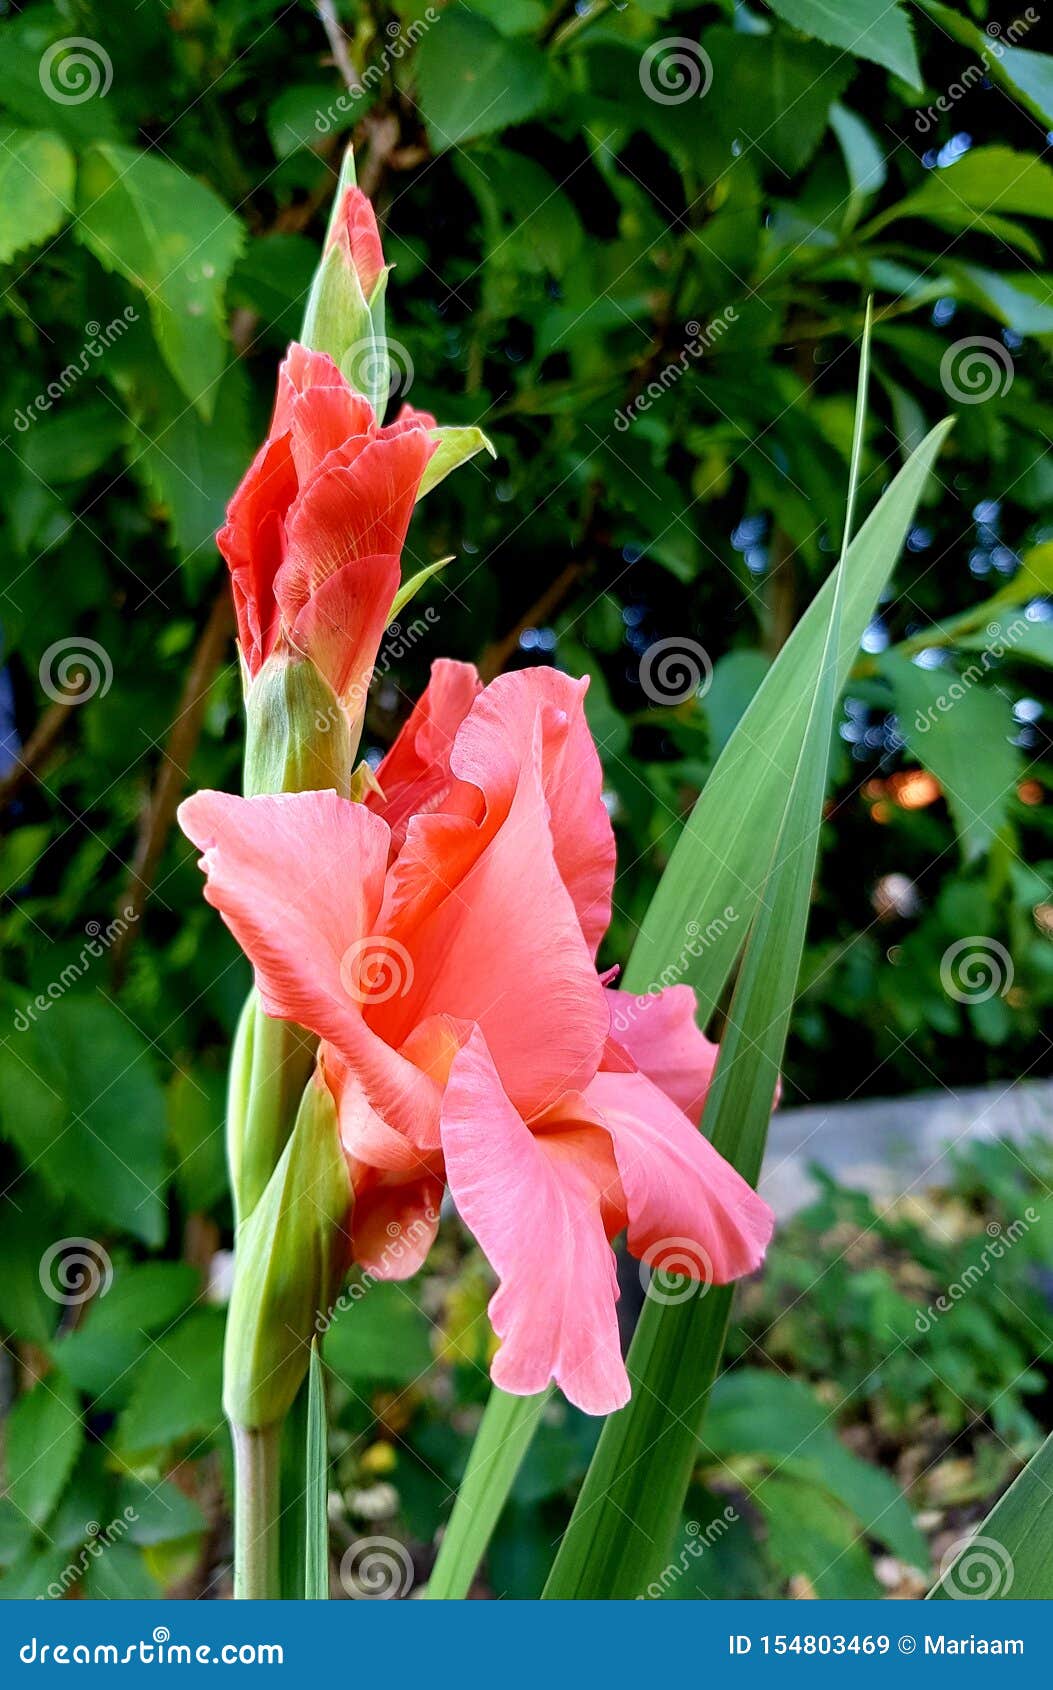 sword lily also called gladioli. gladiolus flower blossoms.